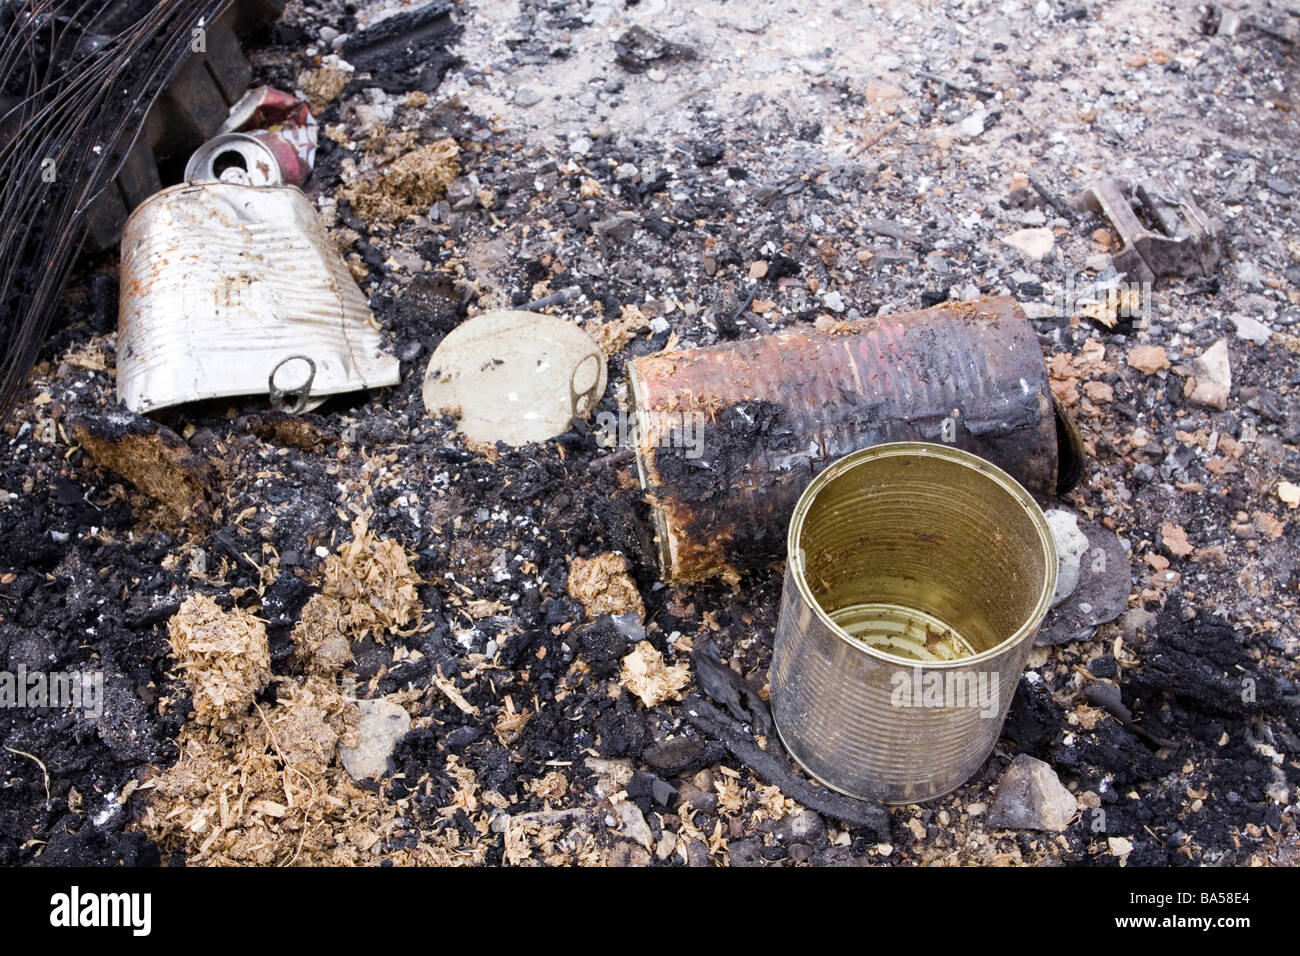 Burnt tin cans in the remains of a fire. Stock Photo